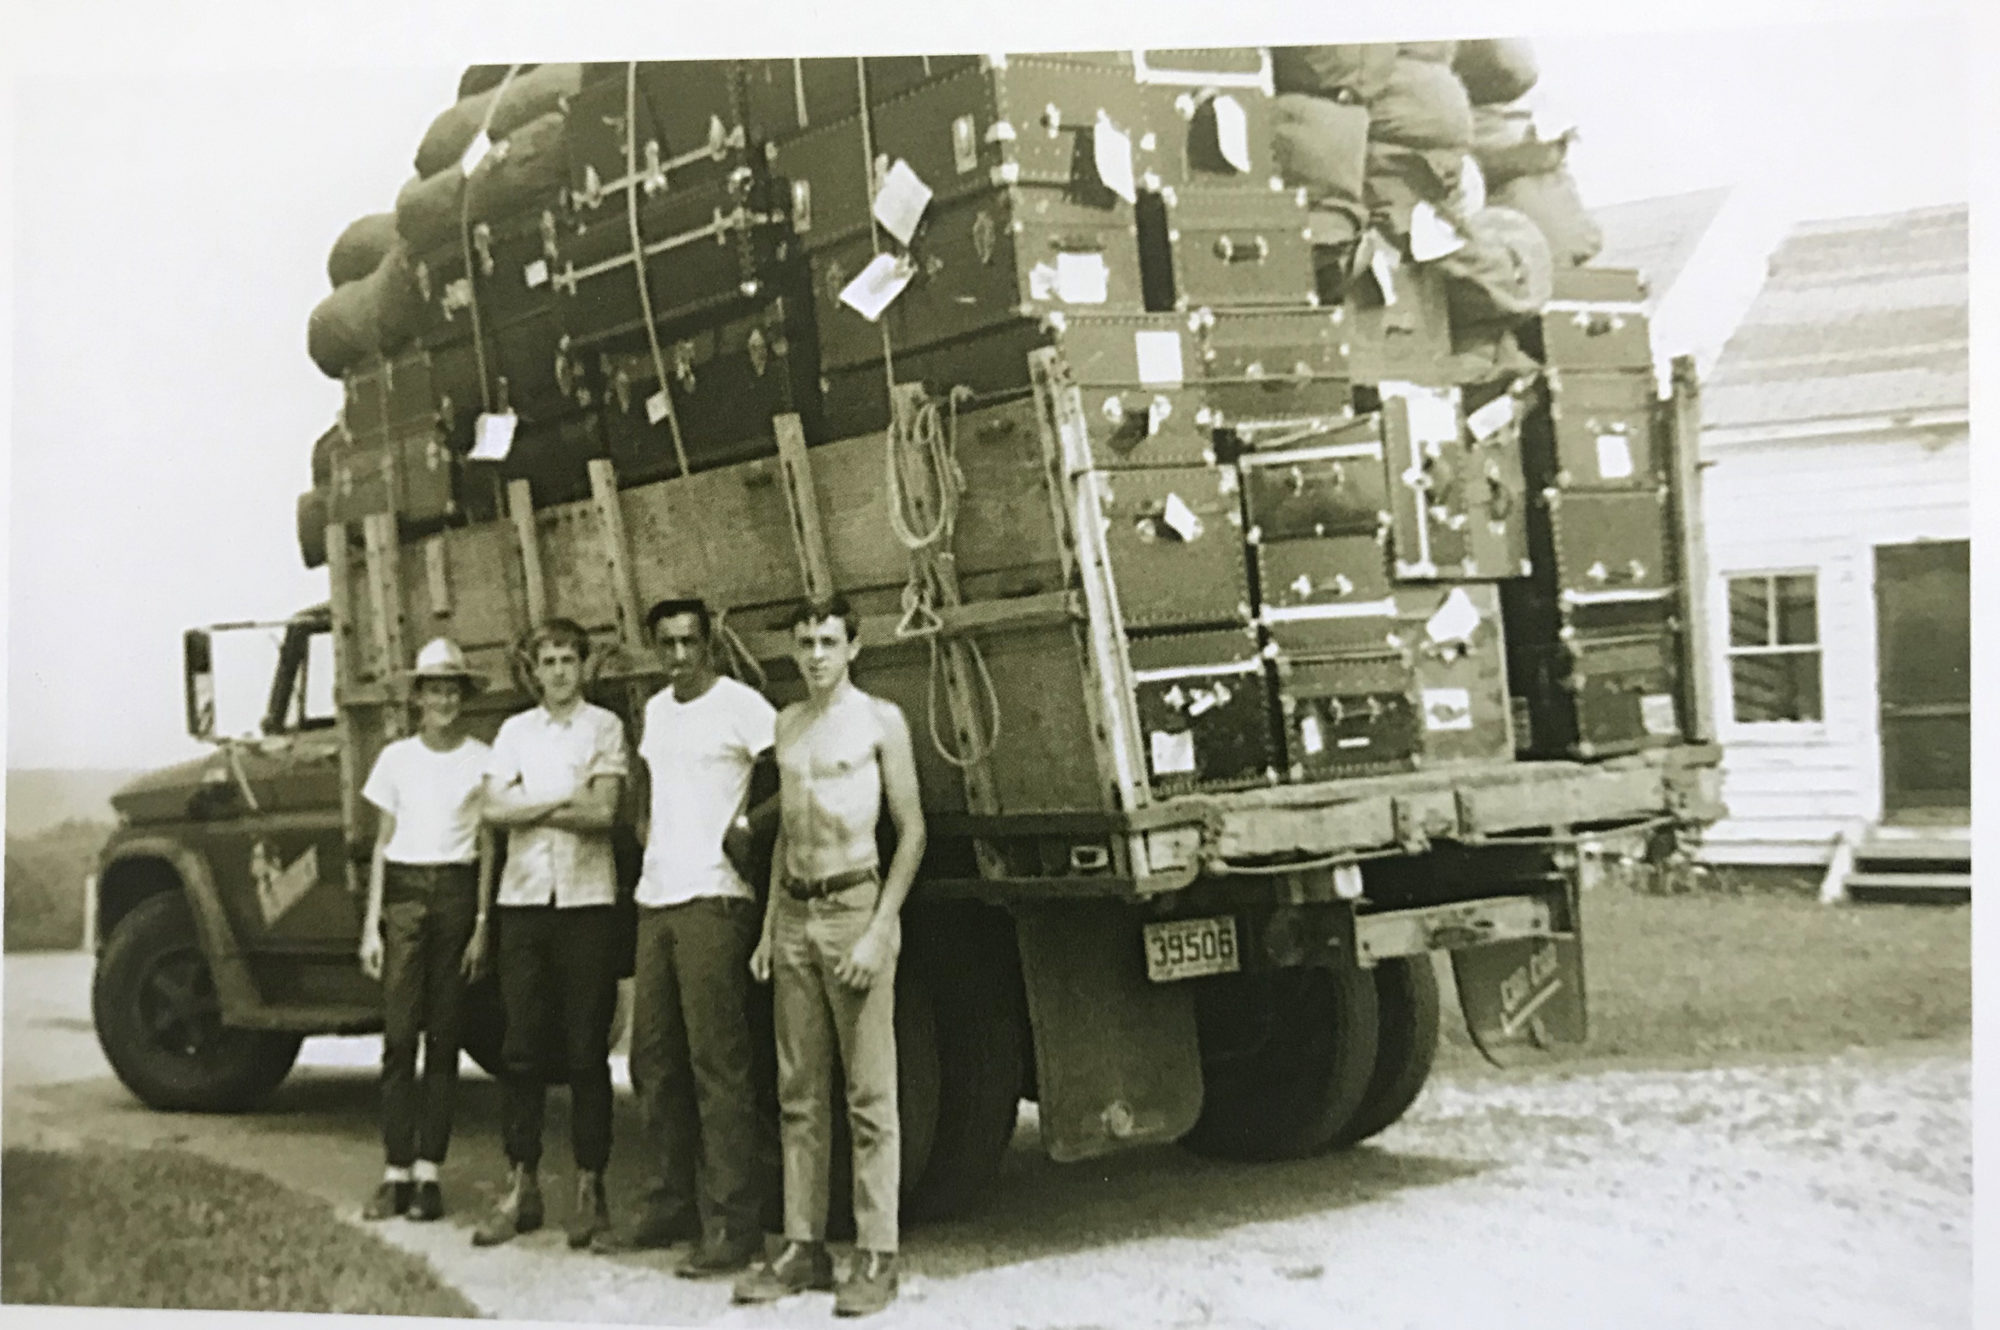 A black and white photo from the early days of Camp Pemi, showing a truck loaded with trunks